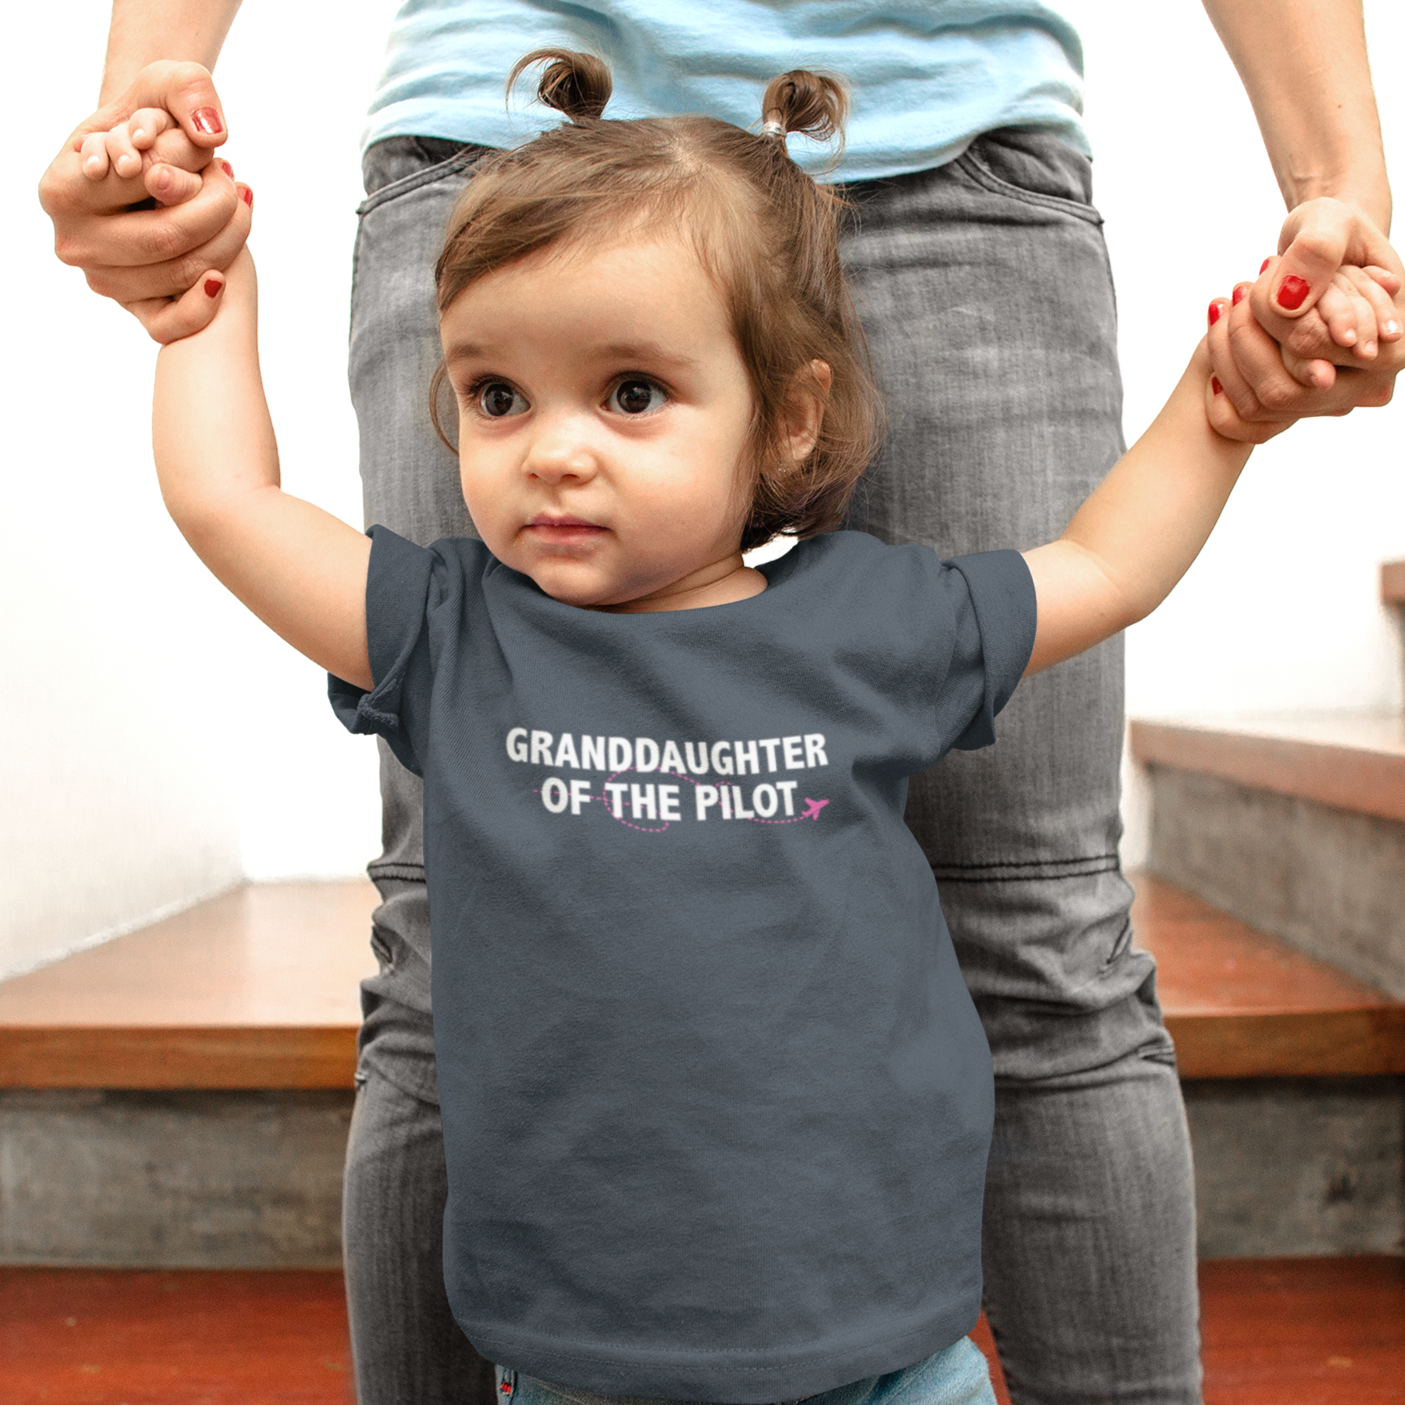 Granddaughter of the/a Pilot - Baby & Toddler T-shirts